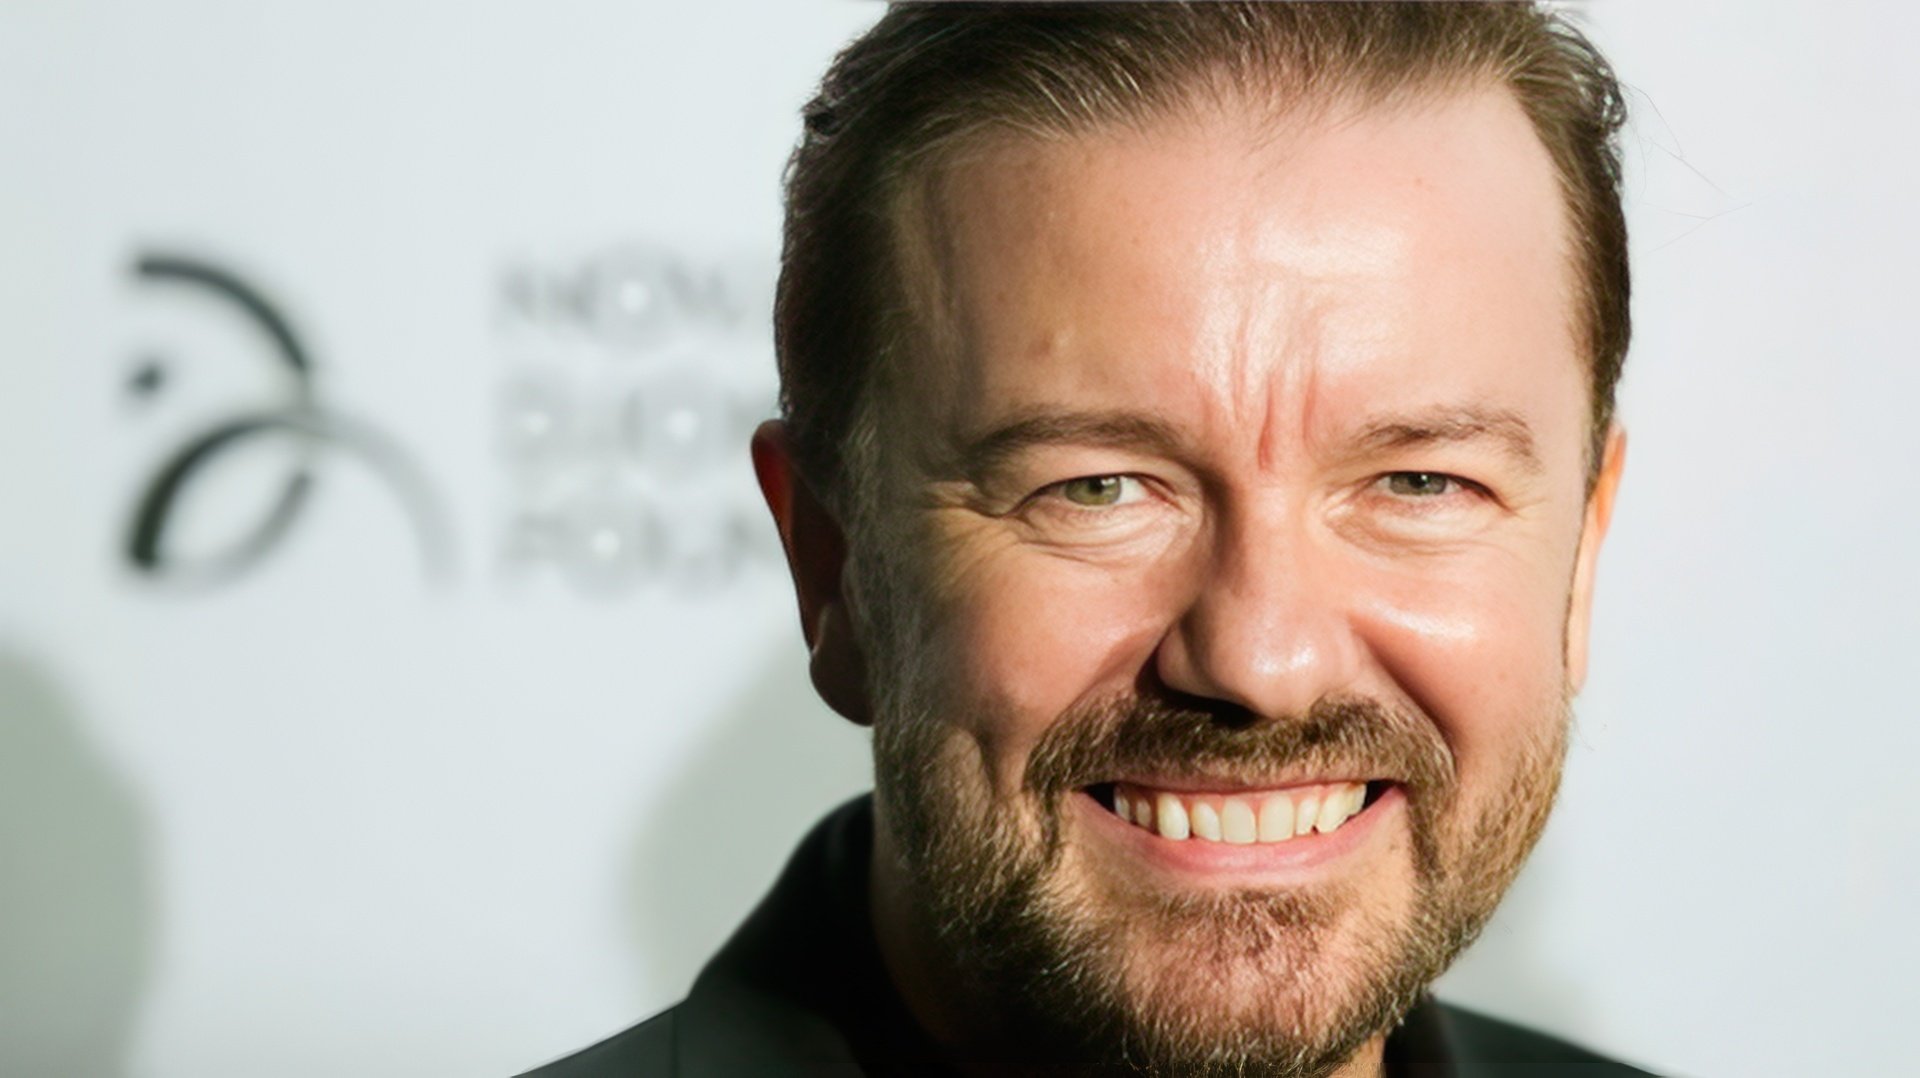 Pictured: Ricky Gervais